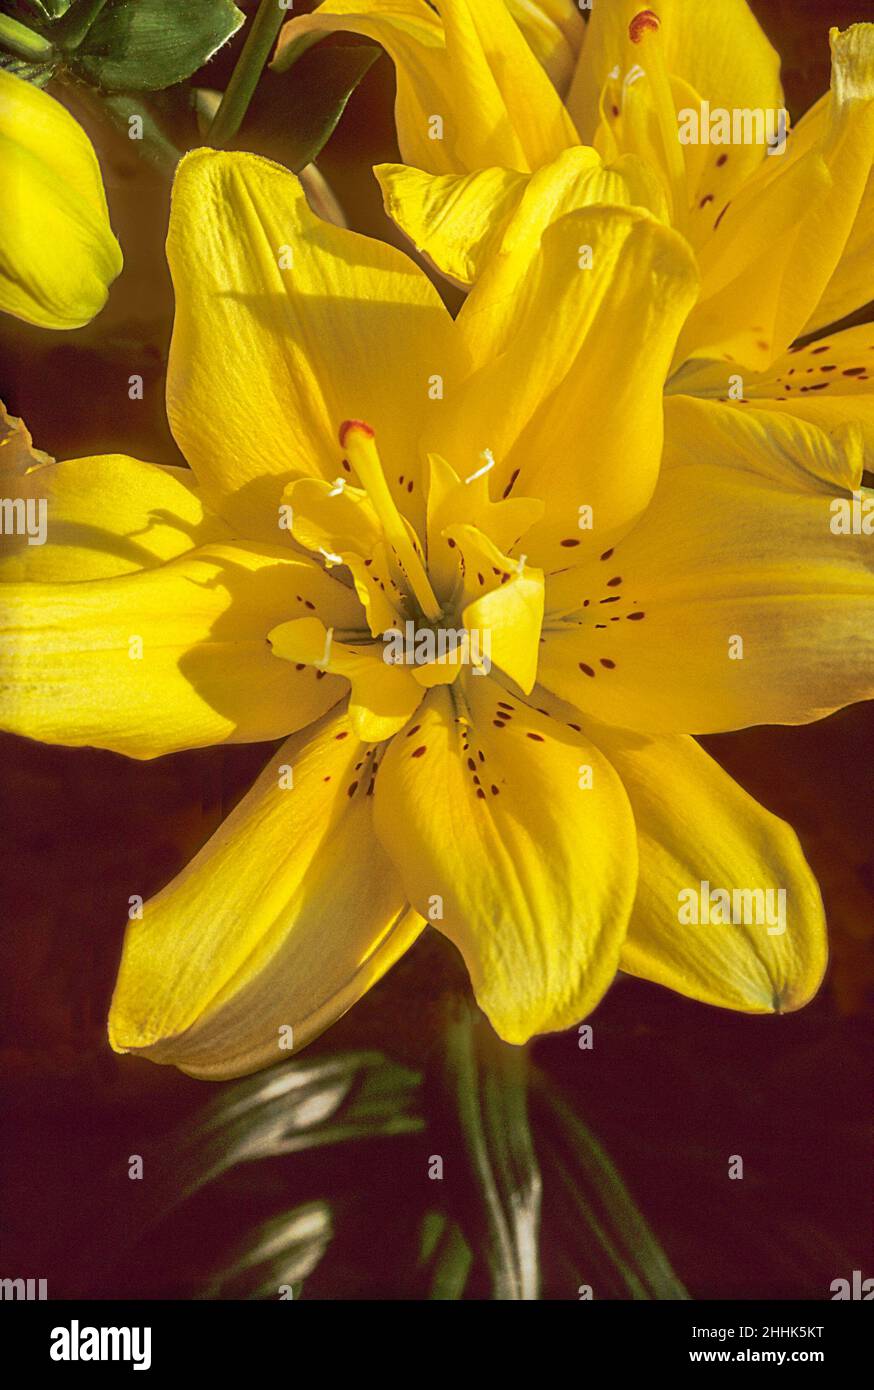 Close up of Lily Fata Morgana. A bright yellow double flowered Div 1 Asiatic Hybrid lily with upward-facing flowers. A summer flowering perennial Stock Photo